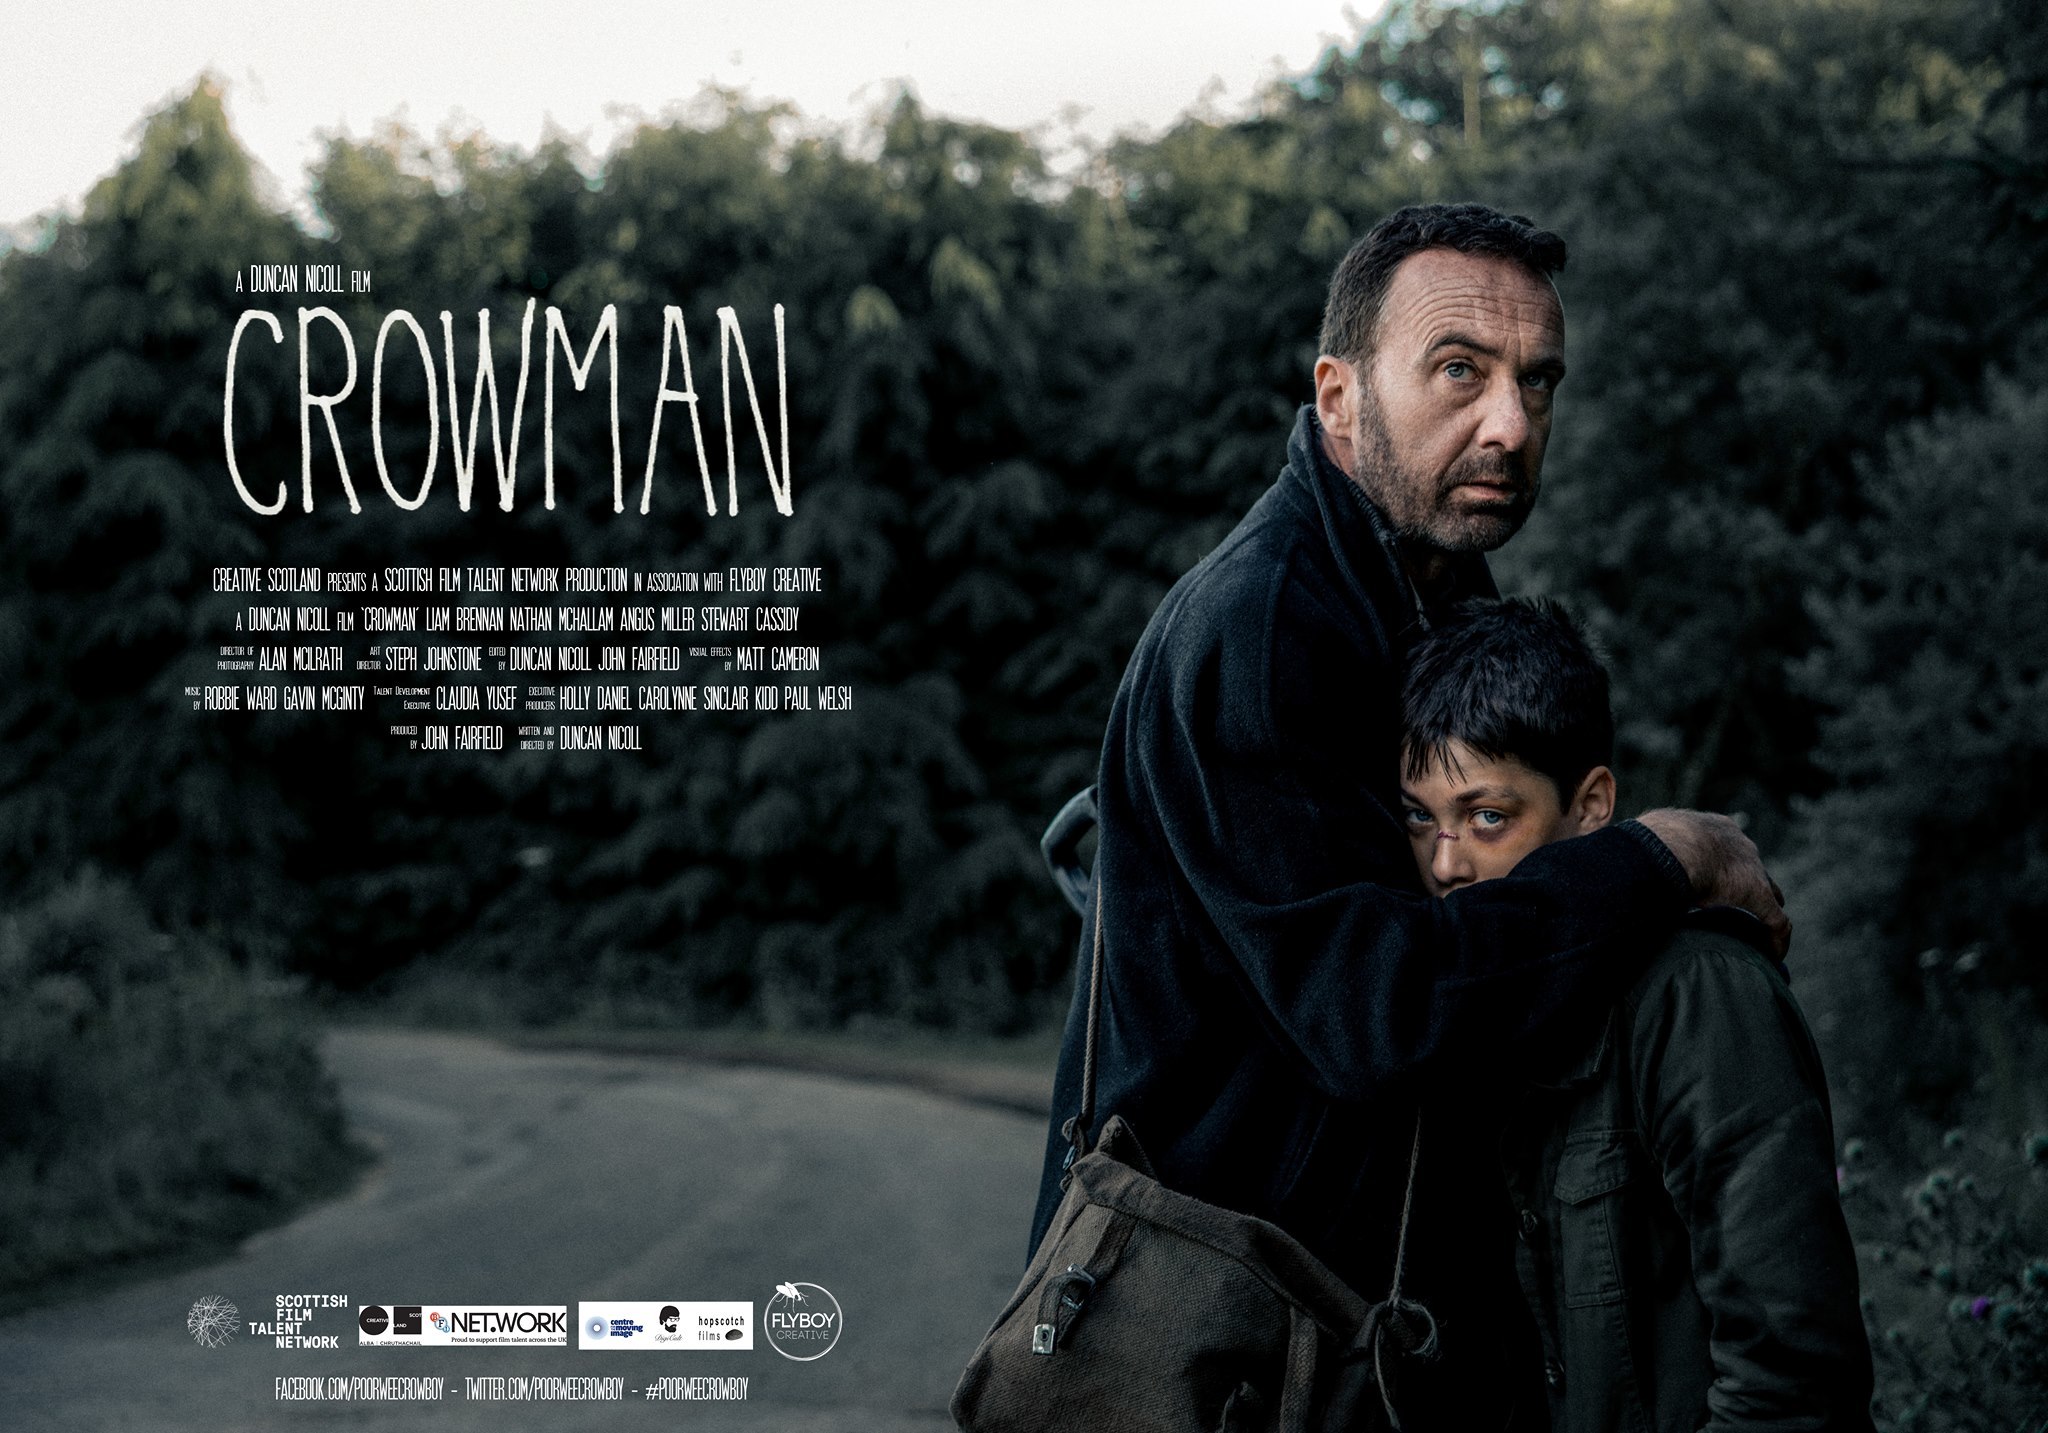 Crowman will have its world premiere at the Edinburgh International Film Festival next month before a second screening in Hollywood. The striking film poster image was taken by Steve Galloway.